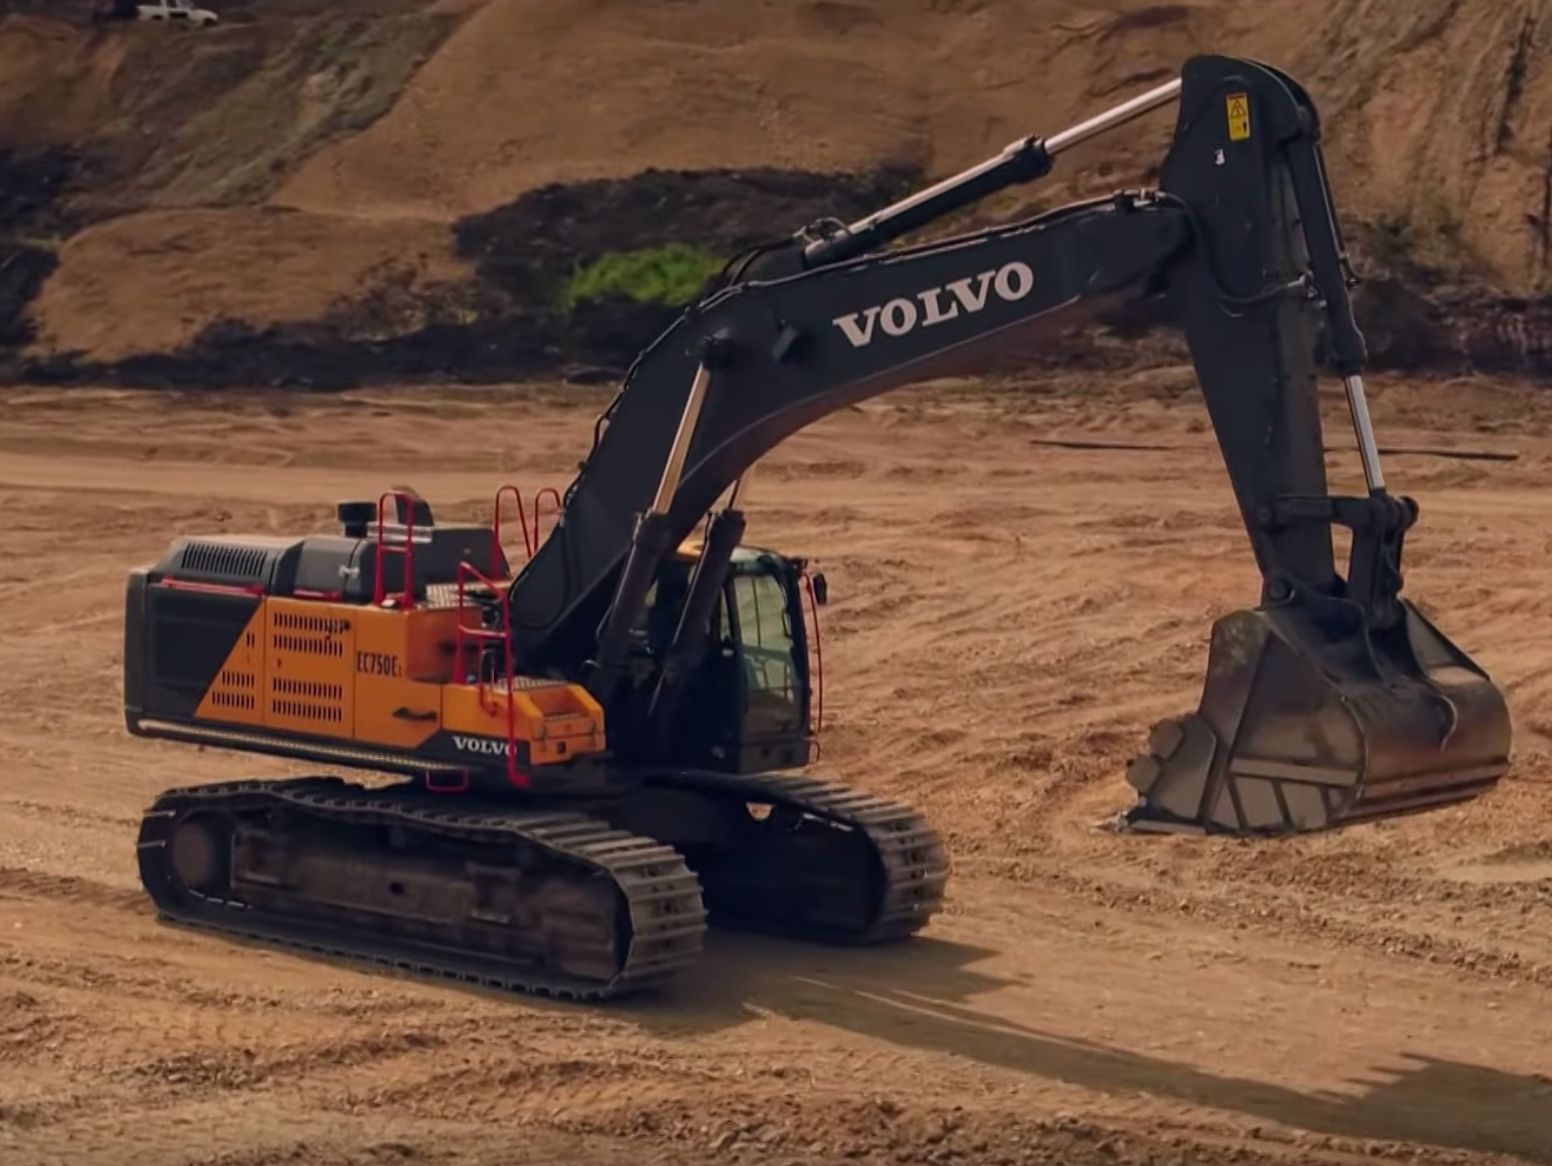 Gold Rush Parker Schnabel Brings In The Biggest Excavator You Ve Ever Seen